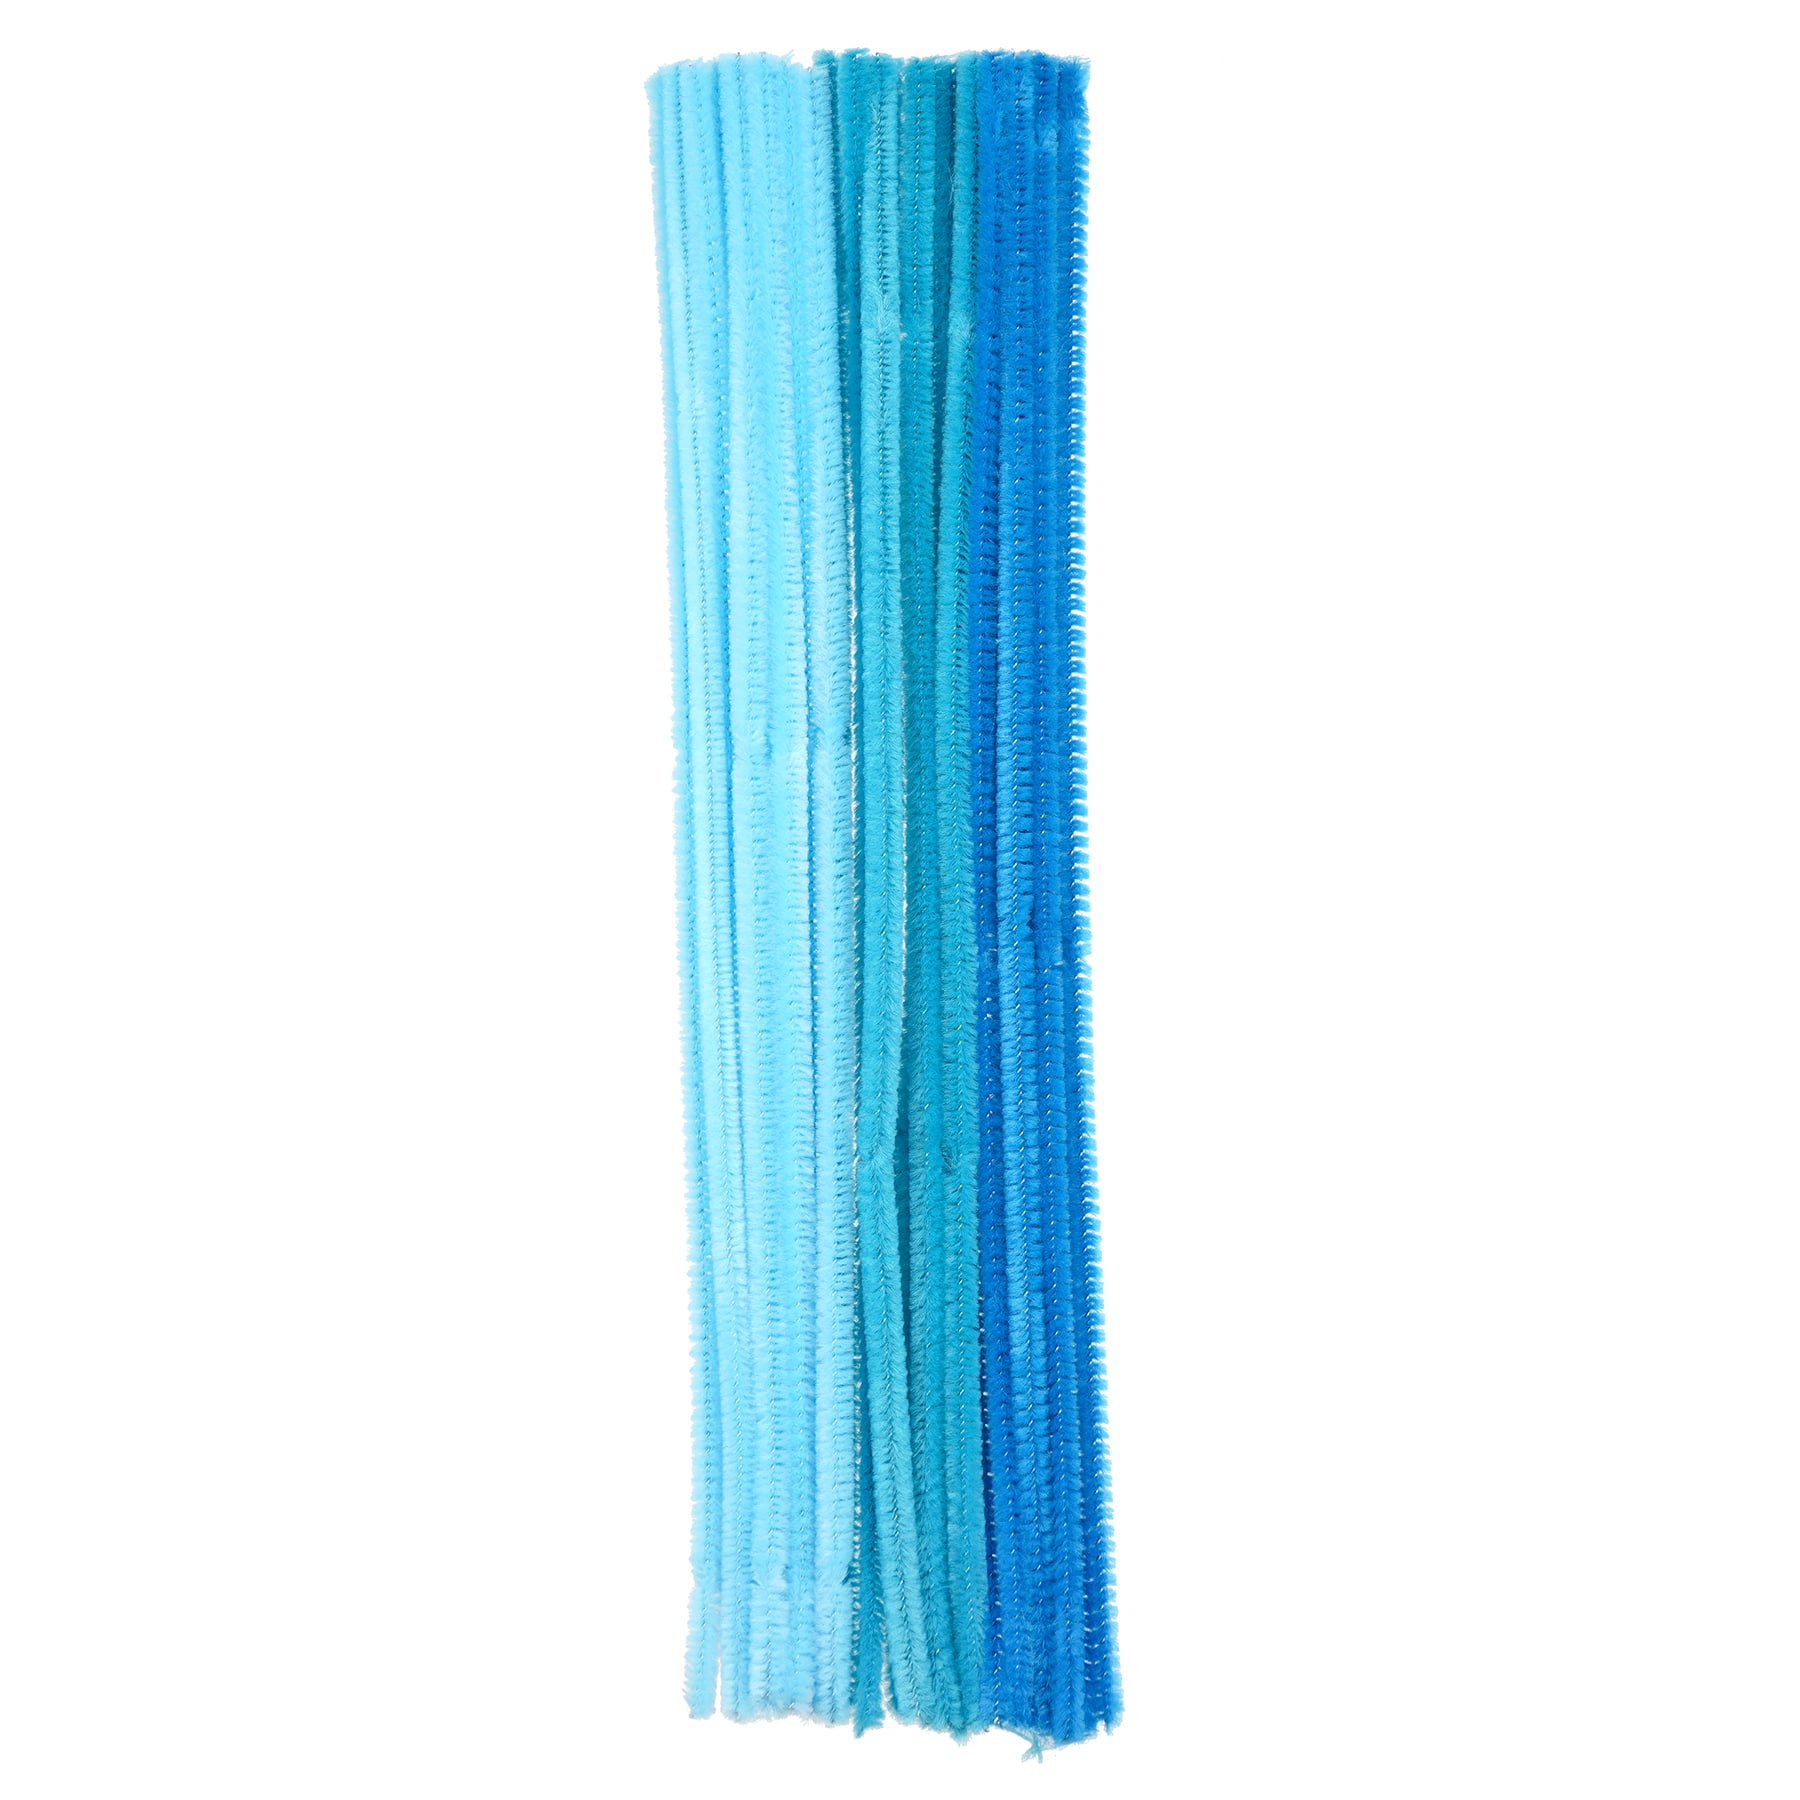 Mixed Blue Chenille Pipe Cleaners, 25ct. by Creatology™